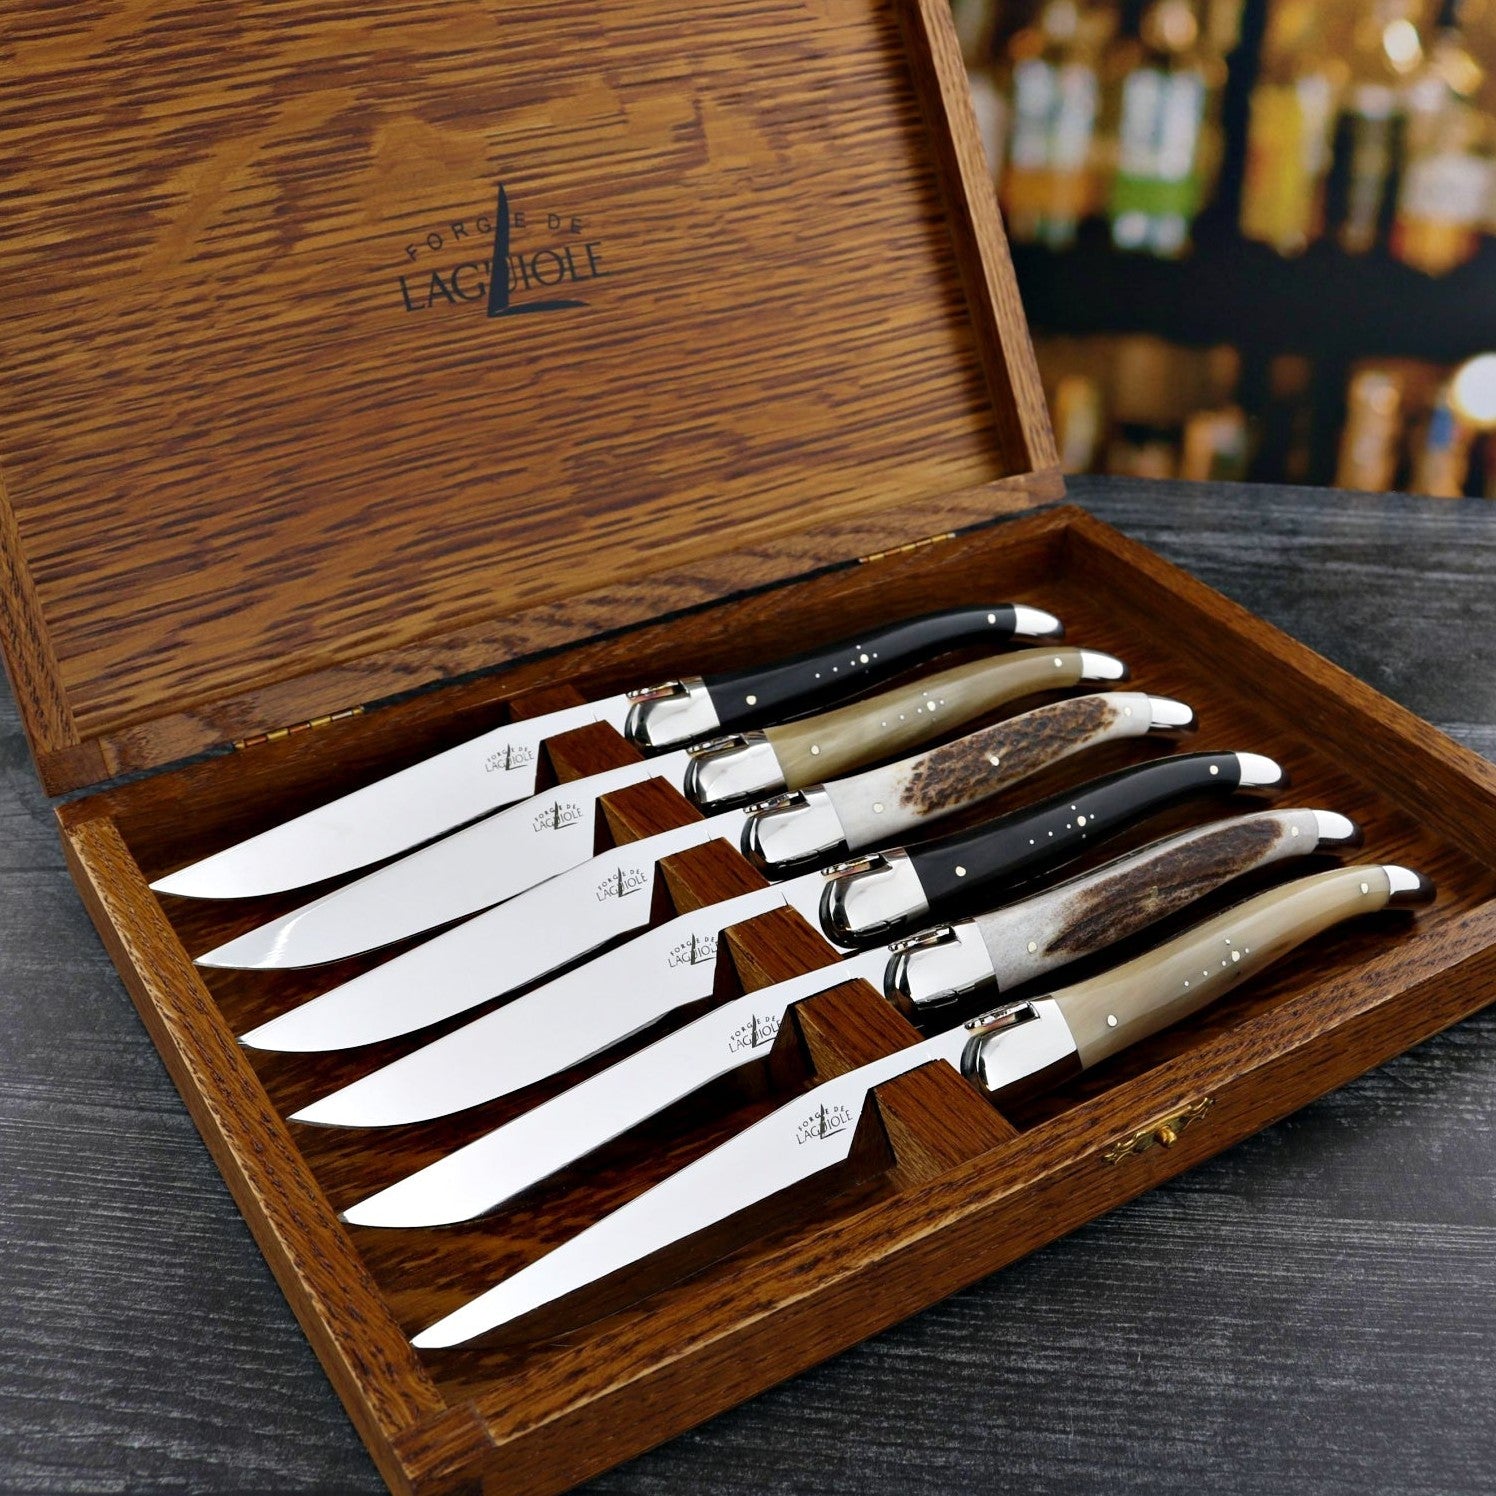 Dishwasher Safe Steak Knives Tagged Philippe STARCK - Forge de Laguiole  USA